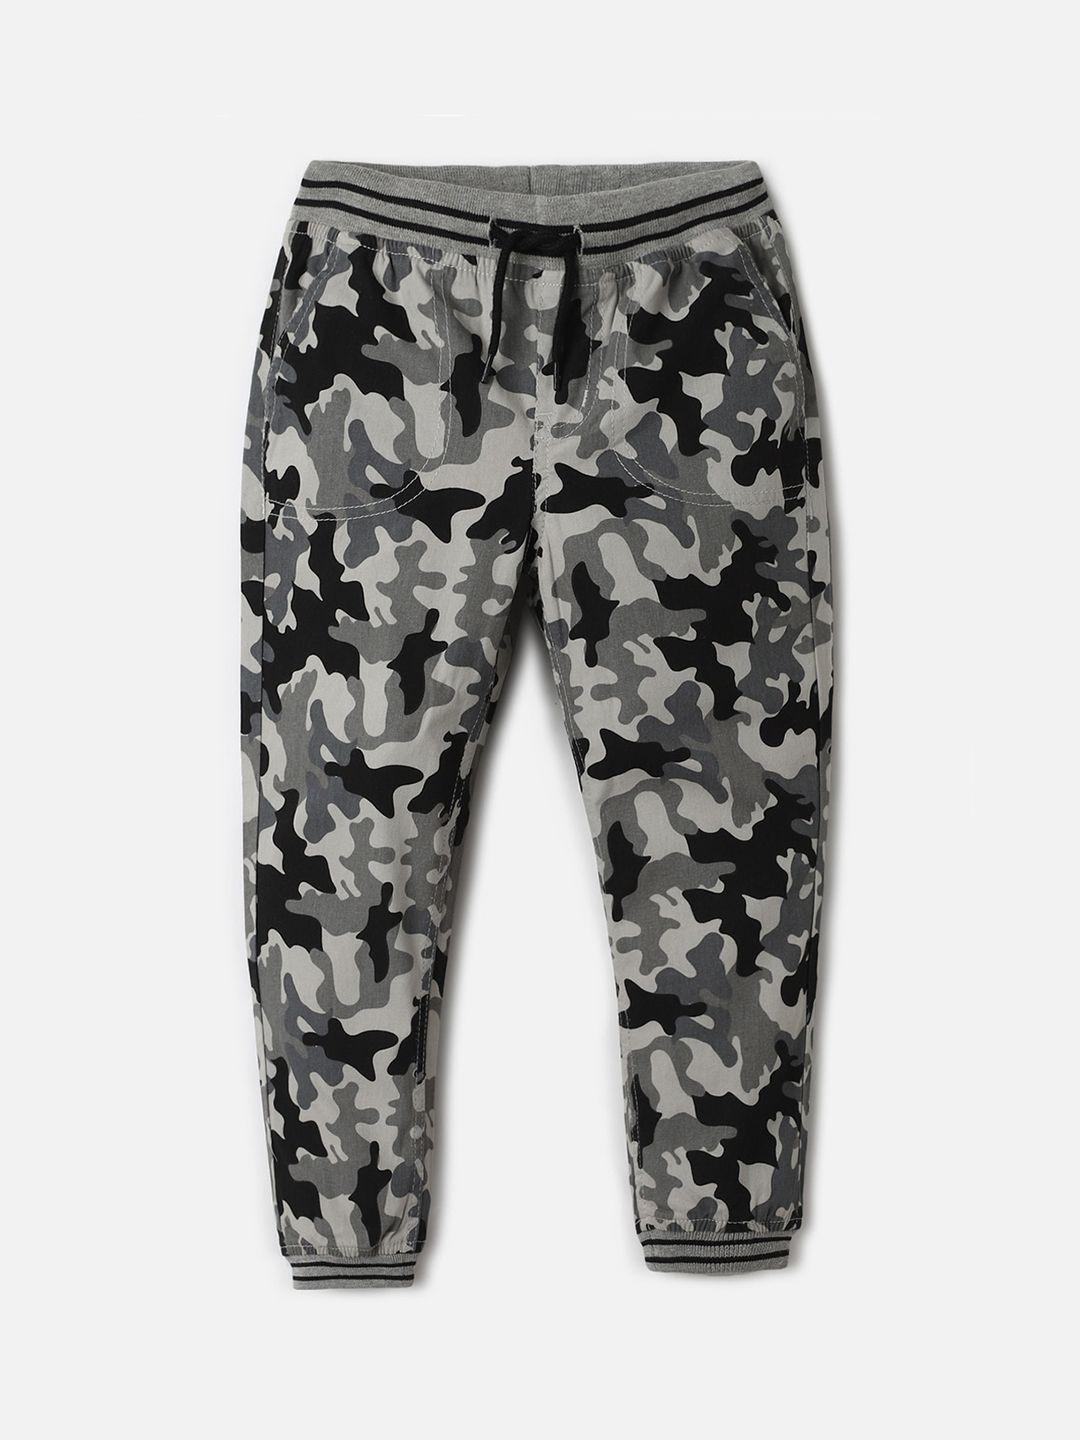 urbanmark-boys-camouflage-printed-pure-cotton-joggers